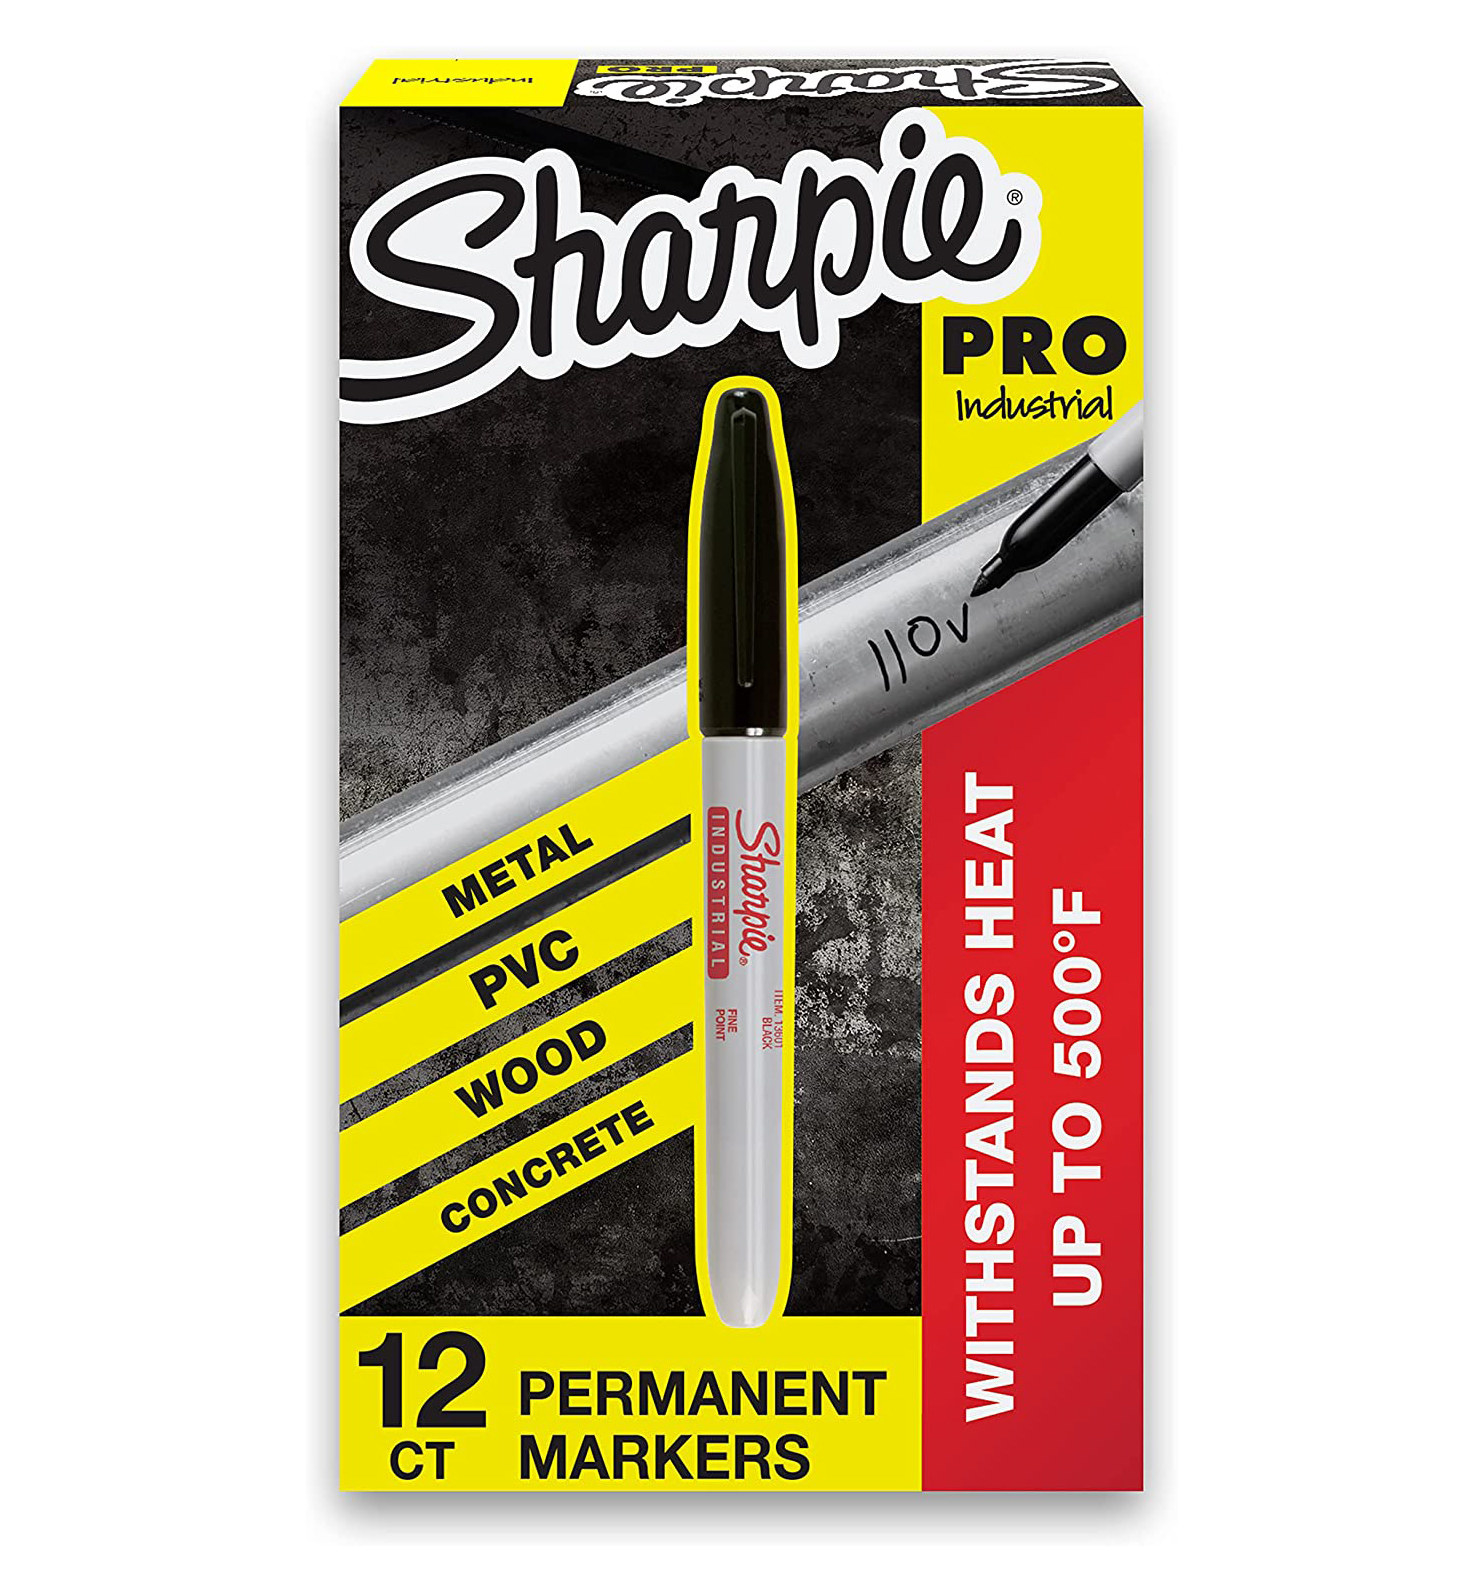 A pack of sharpies